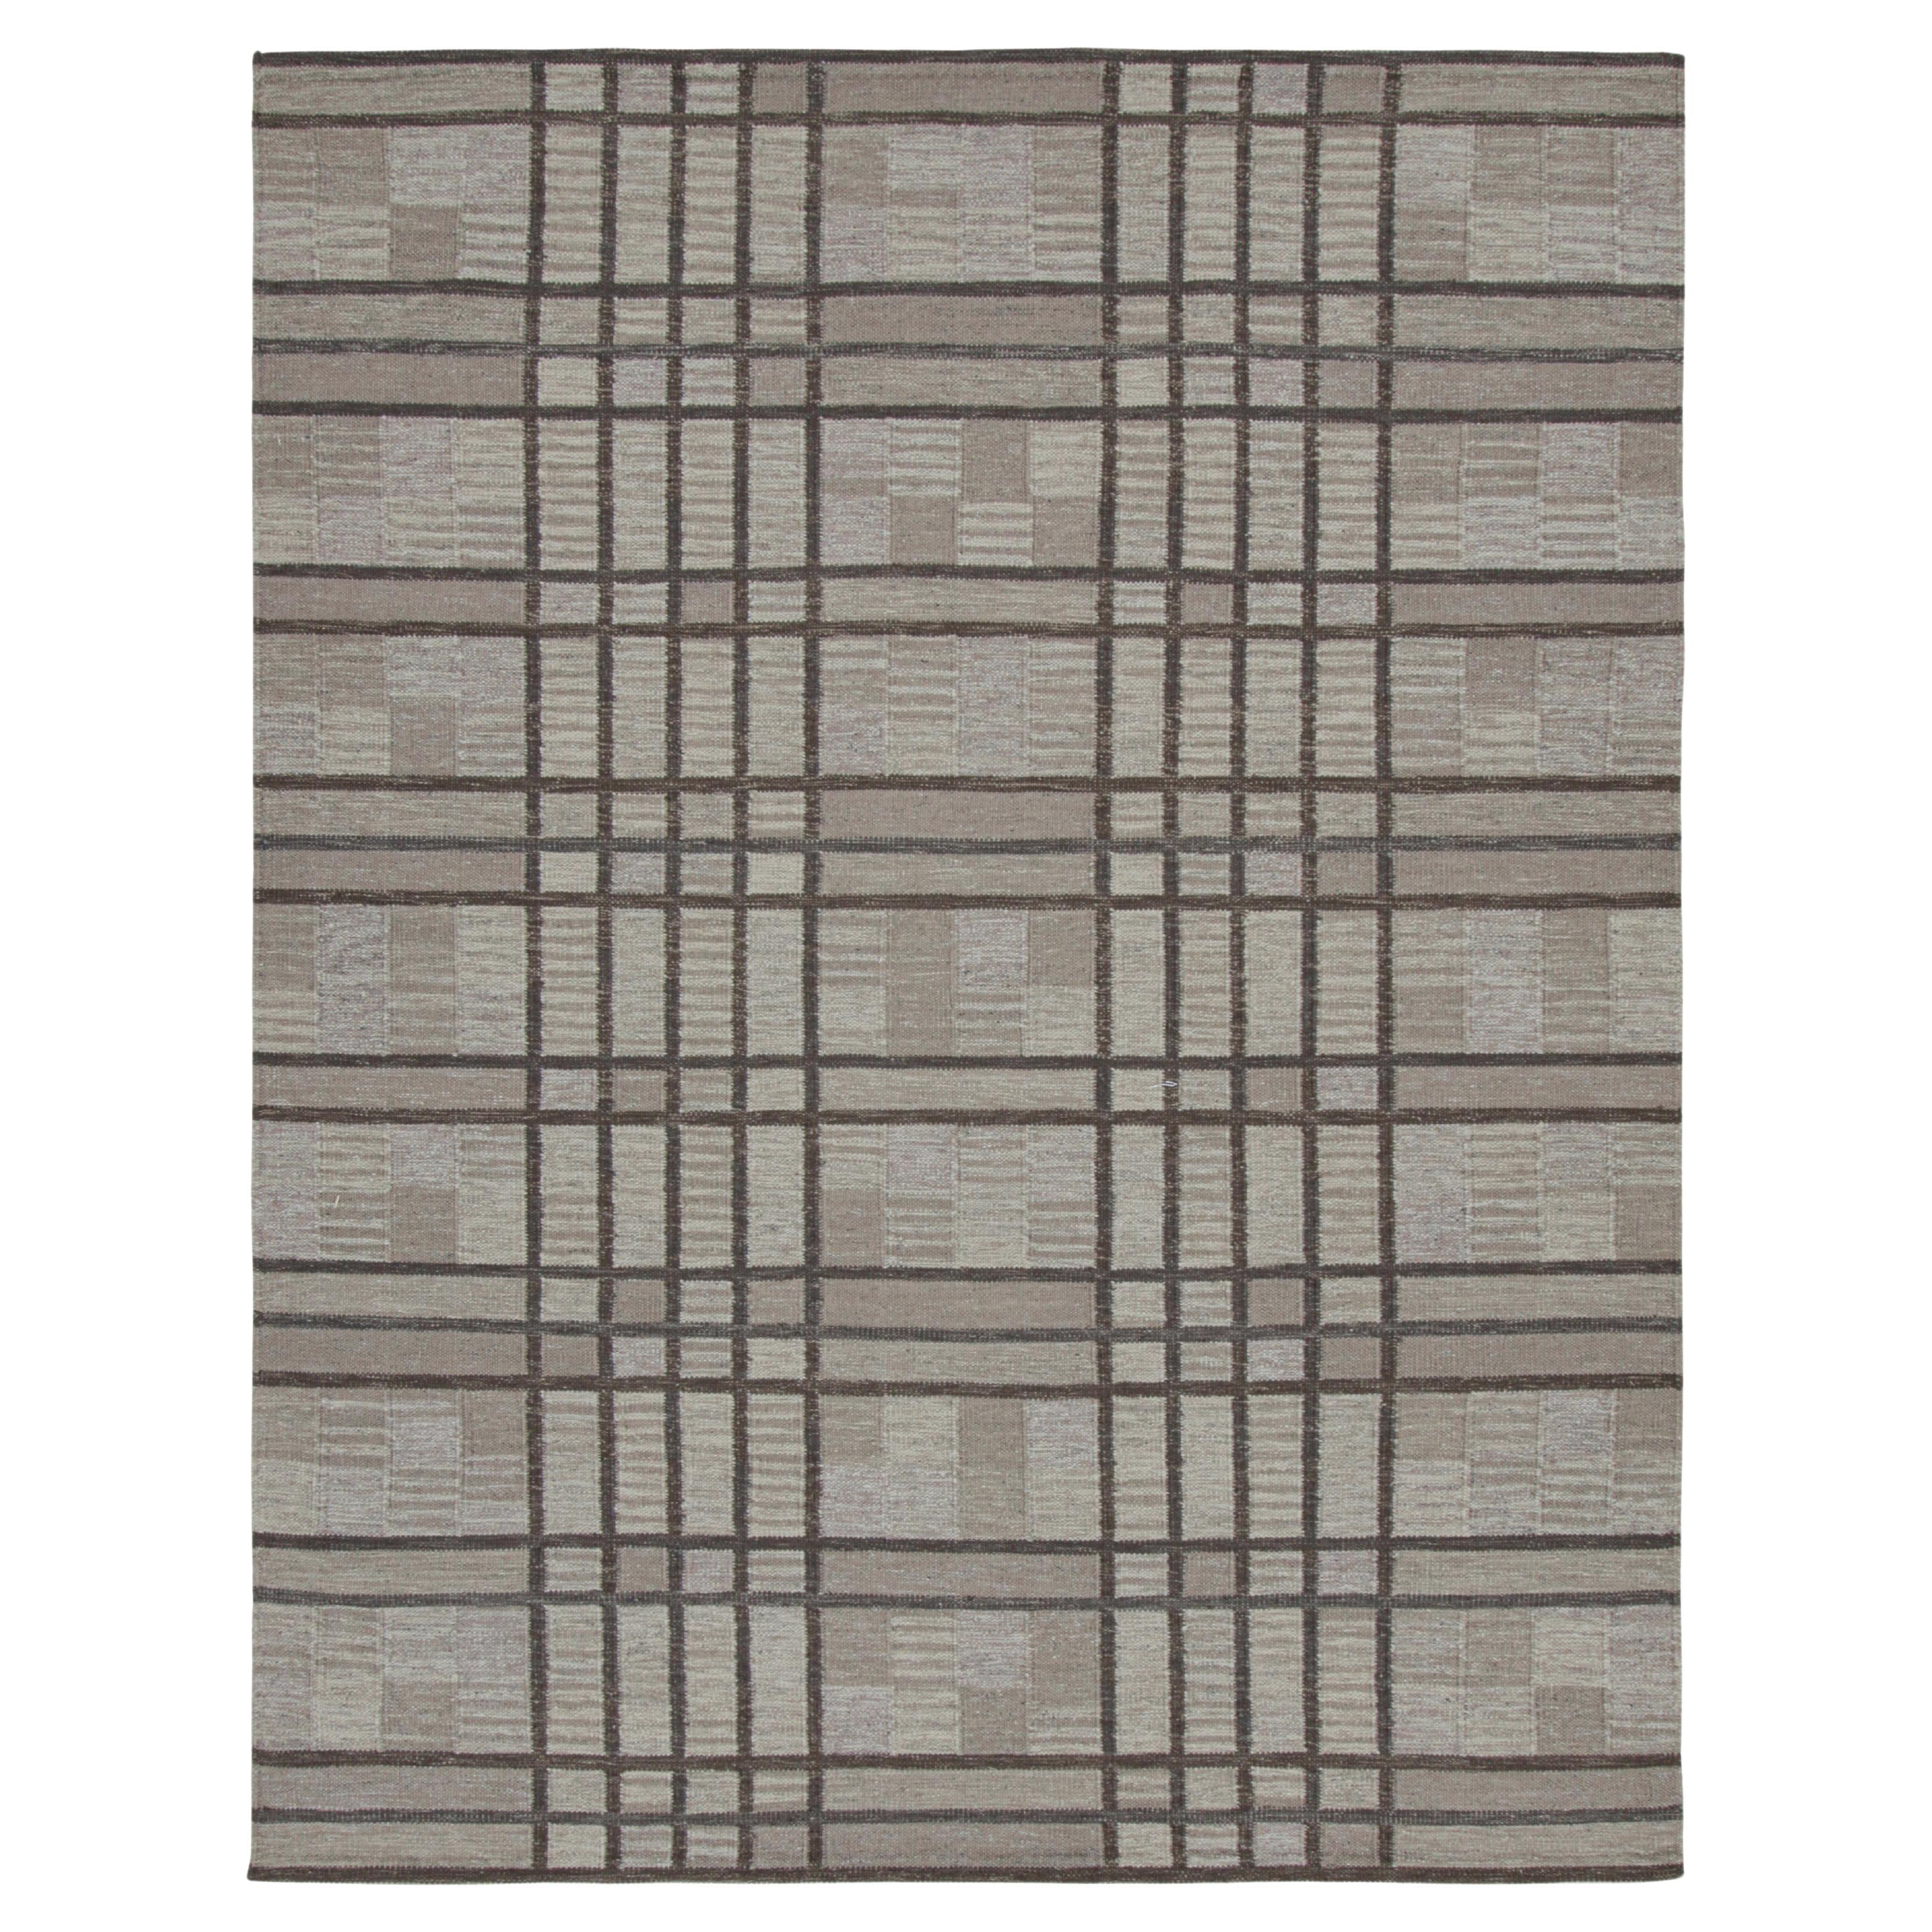 Rug & Kilim’s Scandinavian Style Rug with Geometric Patterns in Tones of Brown For Sale